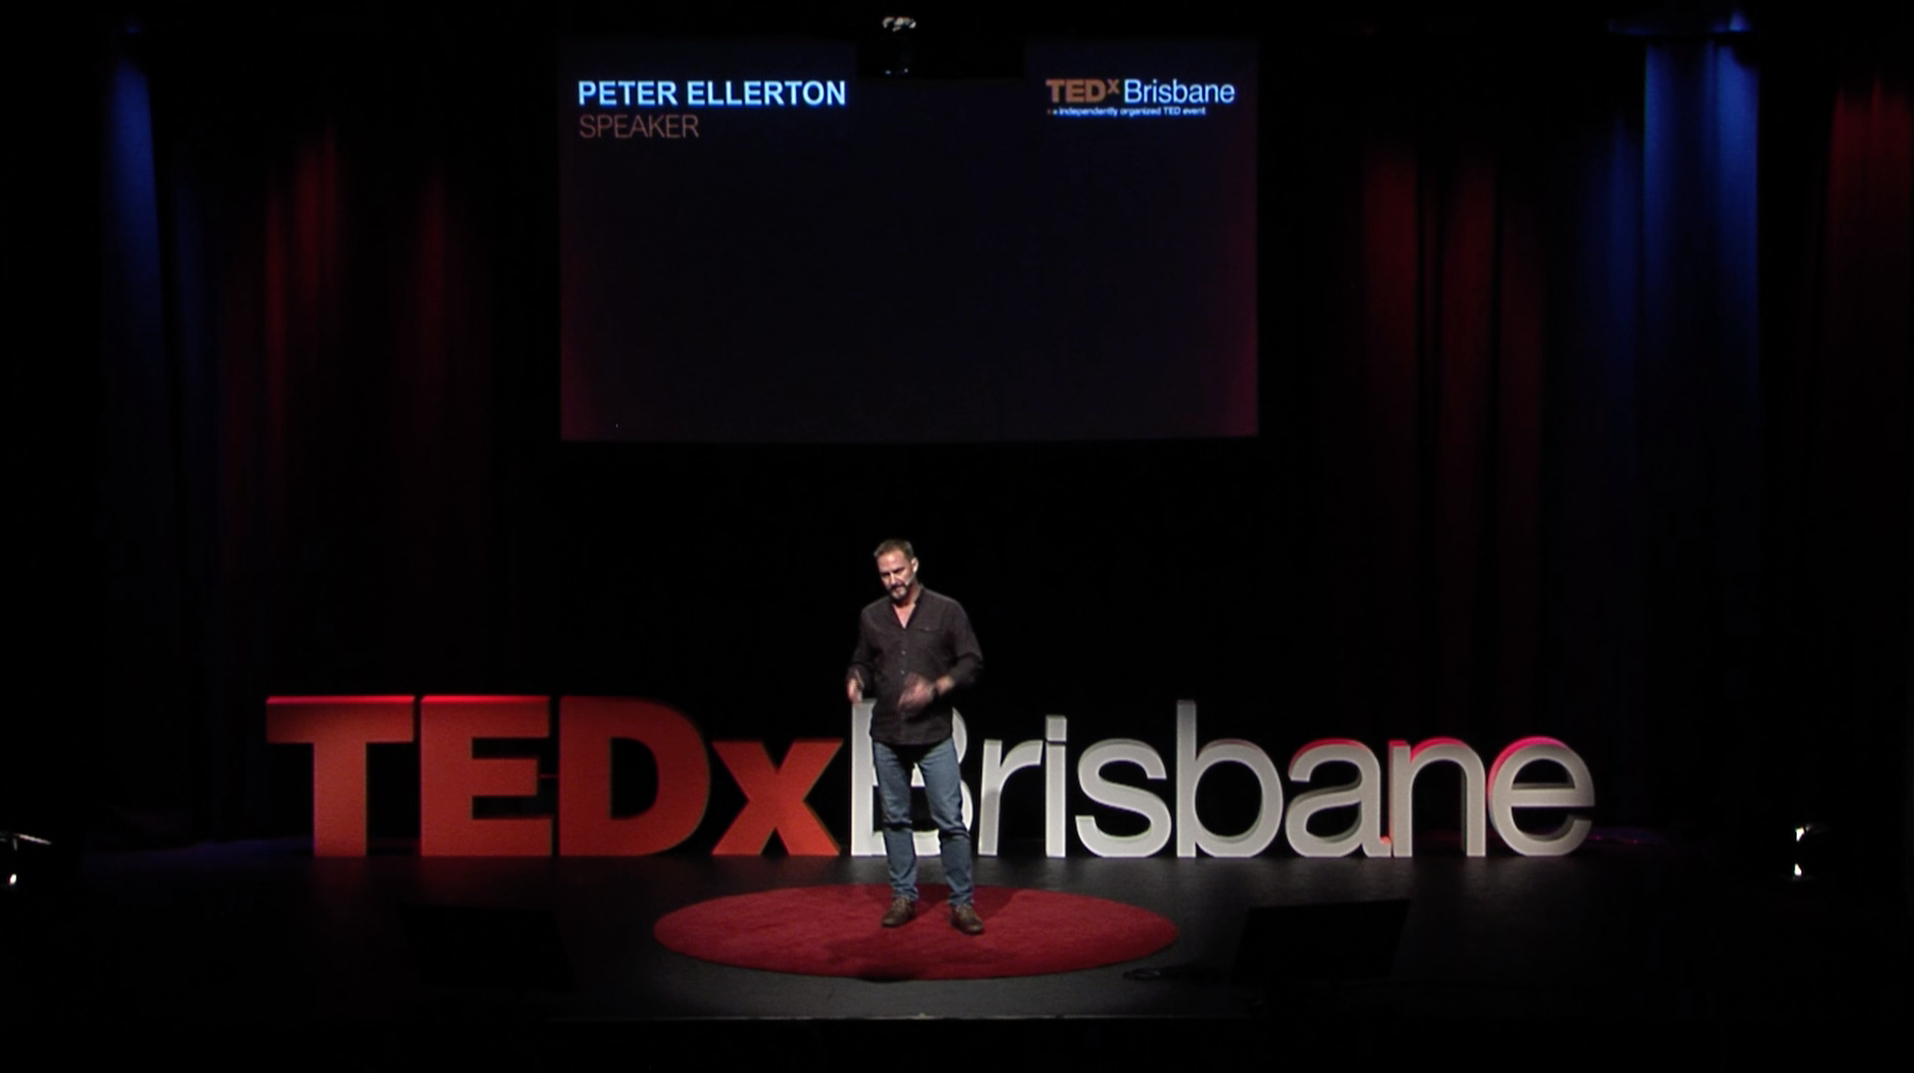 A tall man stand on a dark stage at the Tivoli Theatre, Brisbane. He stands on a small red circular carpet in front of a large TEDx Brisbane sign on the floor behind him and a projected presentation above him. His name is Peter Ellerton.